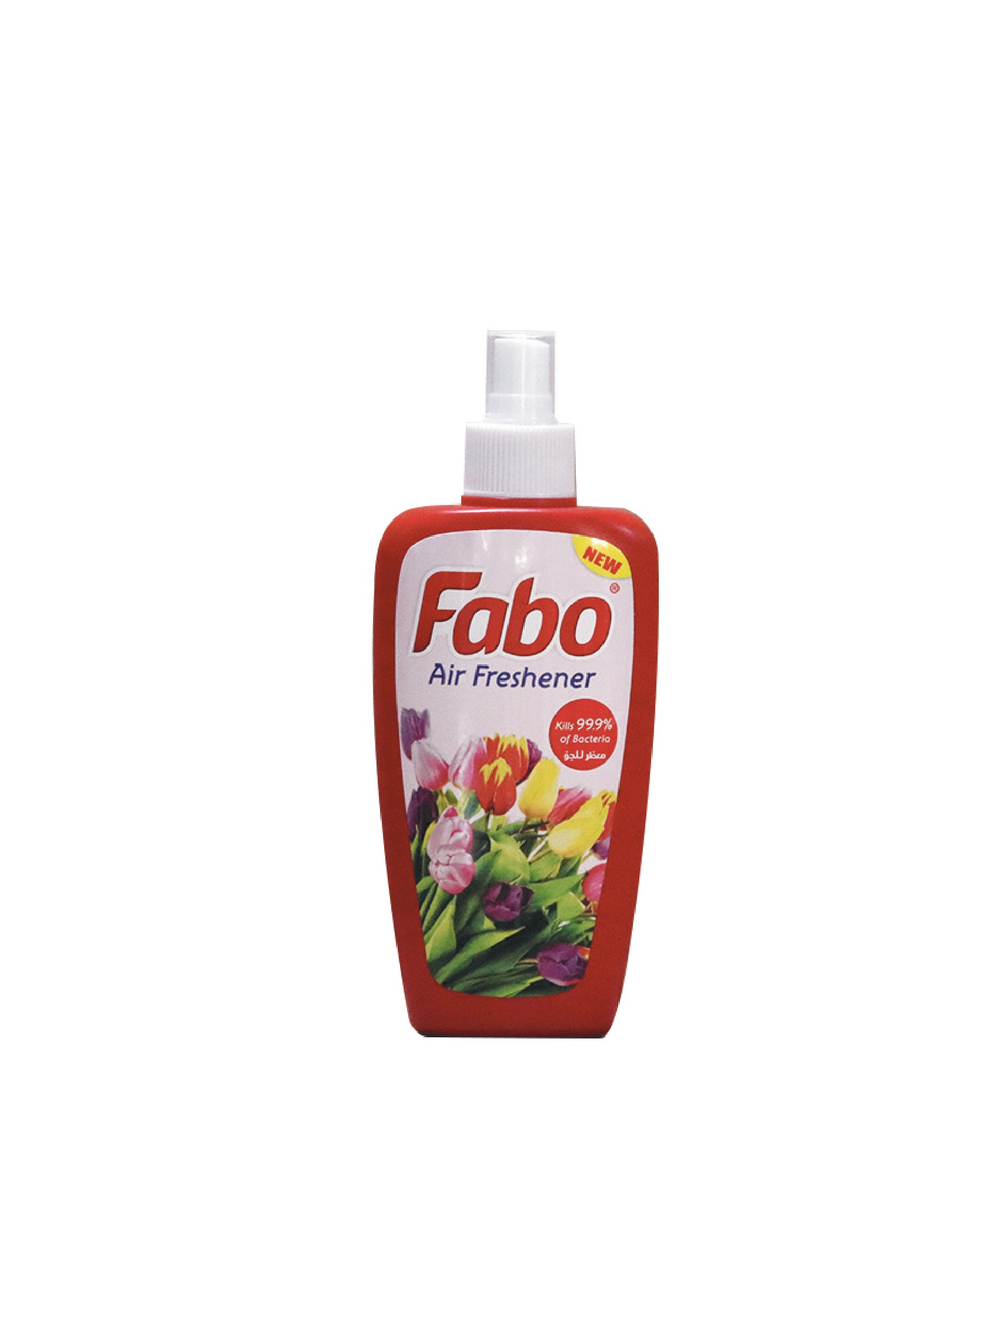 fabo-products_page-0042